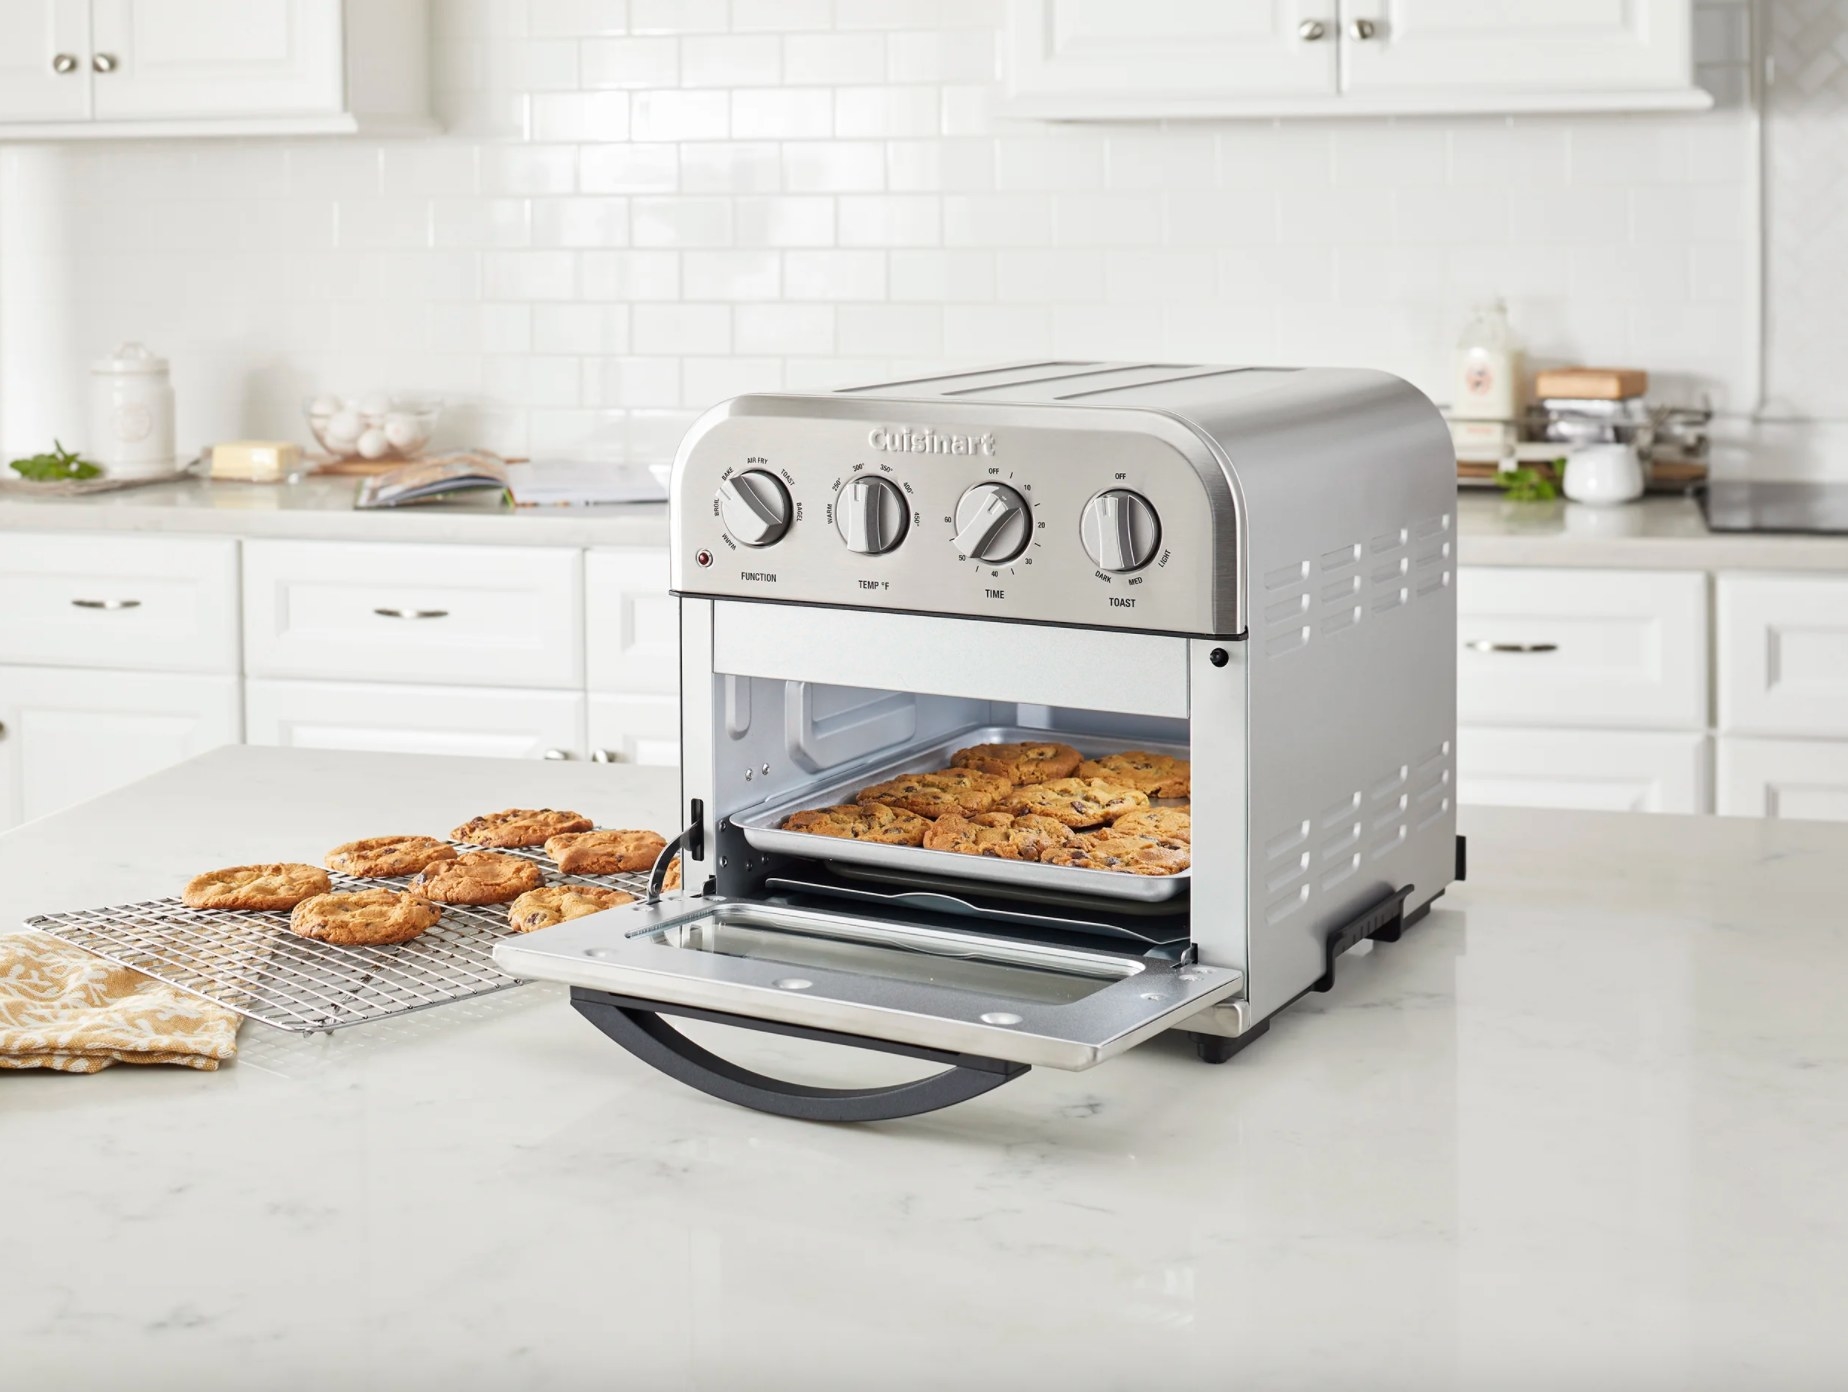 The Cuisinart compact airfryer toaster oven in stainless steel being used to bake cookies